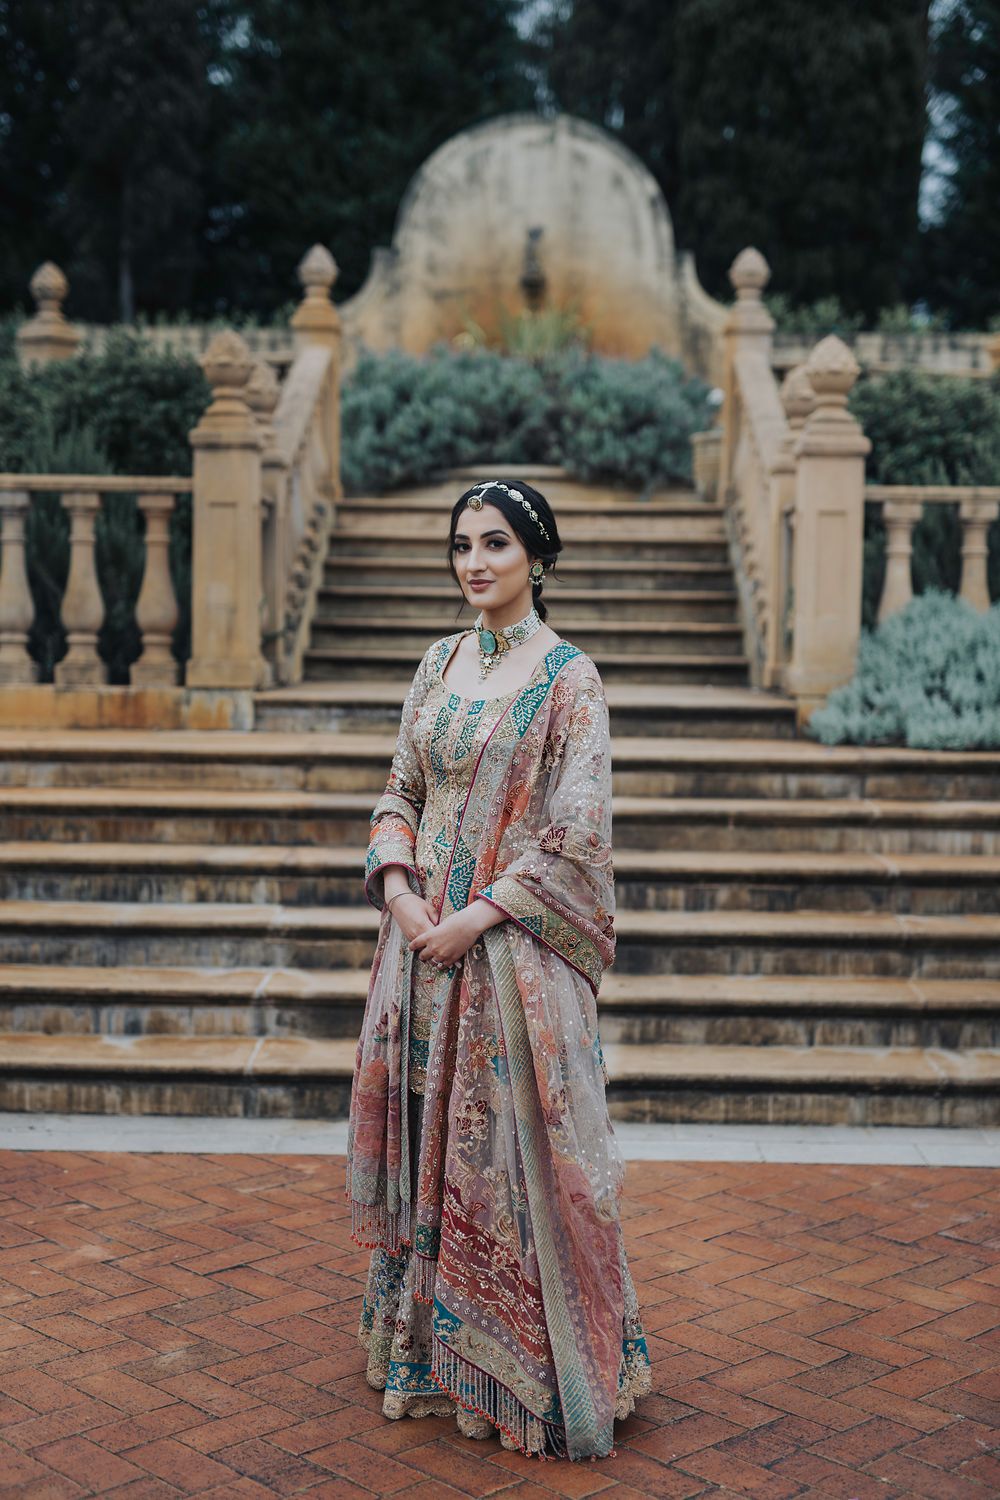 Photo of Bride wearing a multi-colored sharara for her sangeet